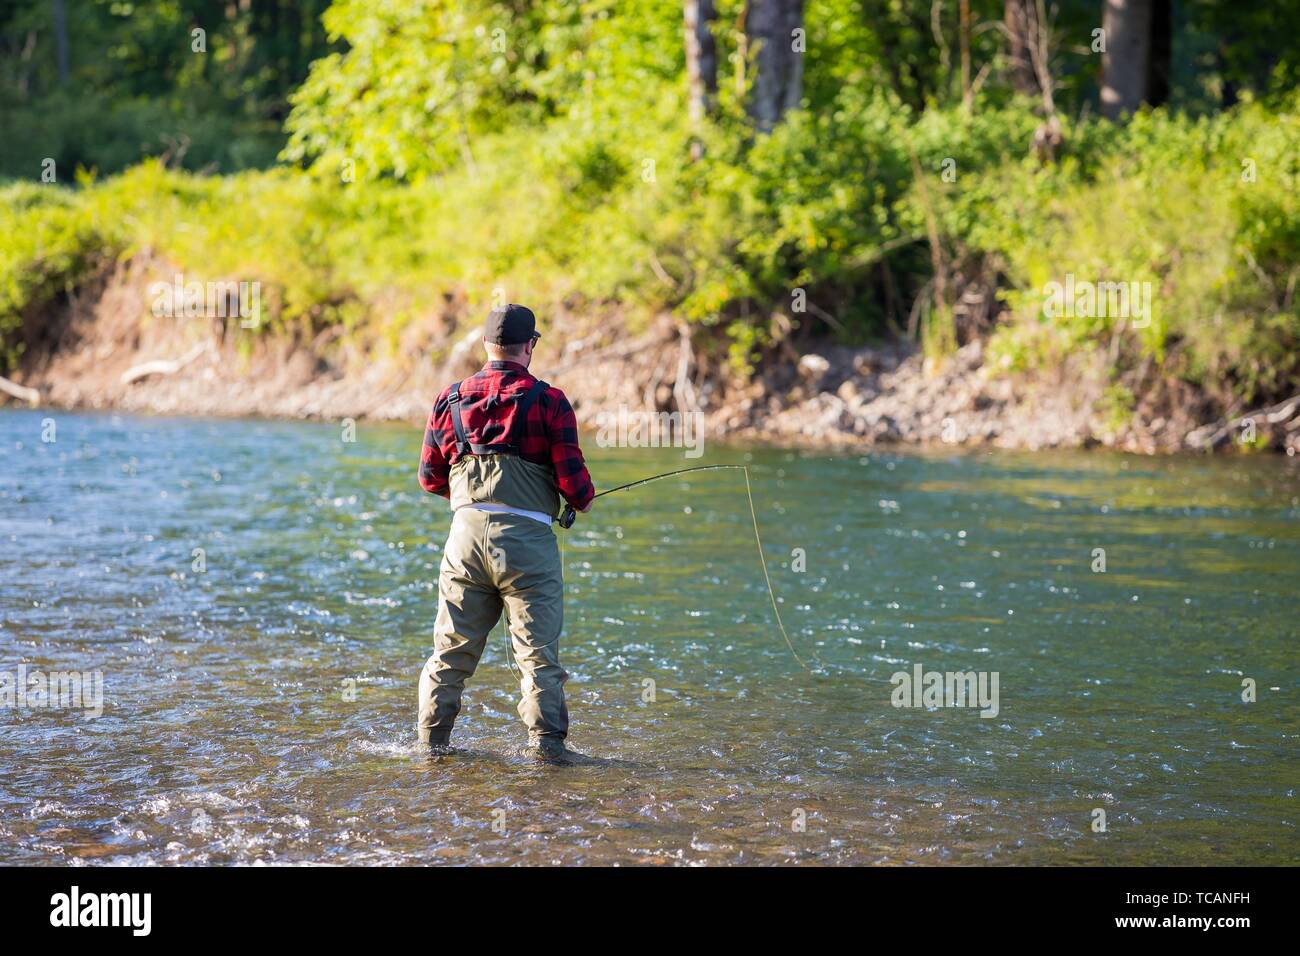 Fly fisherman casting a fly rod to rising fish on the McKenzie River in Oregon while catch and release fishing for native redside rainbow trout. Stock Photo